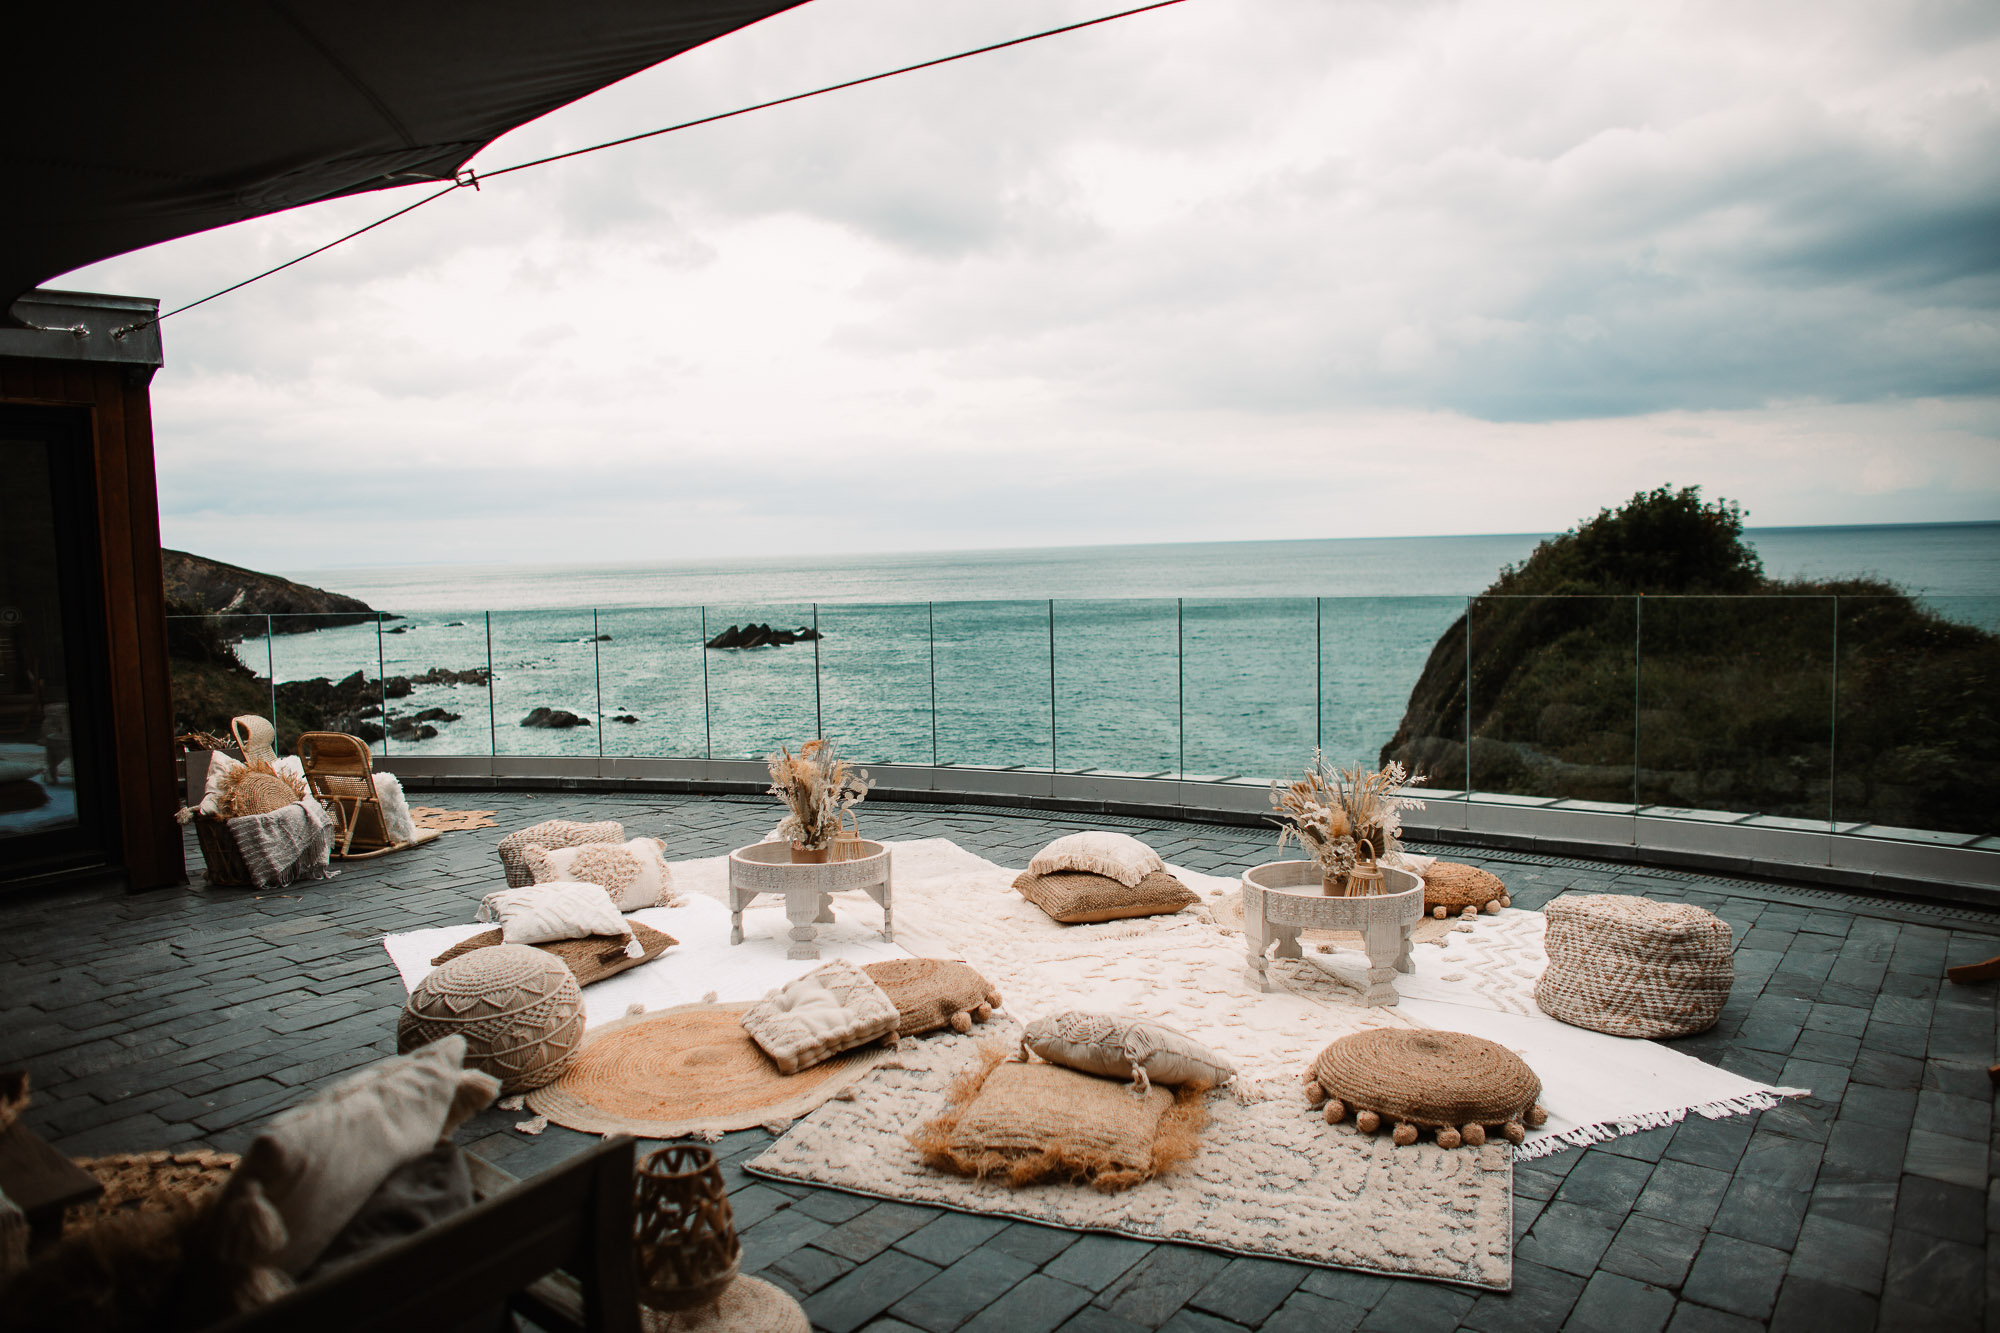 Gorgeous set up on the balcony at tunnels beaches